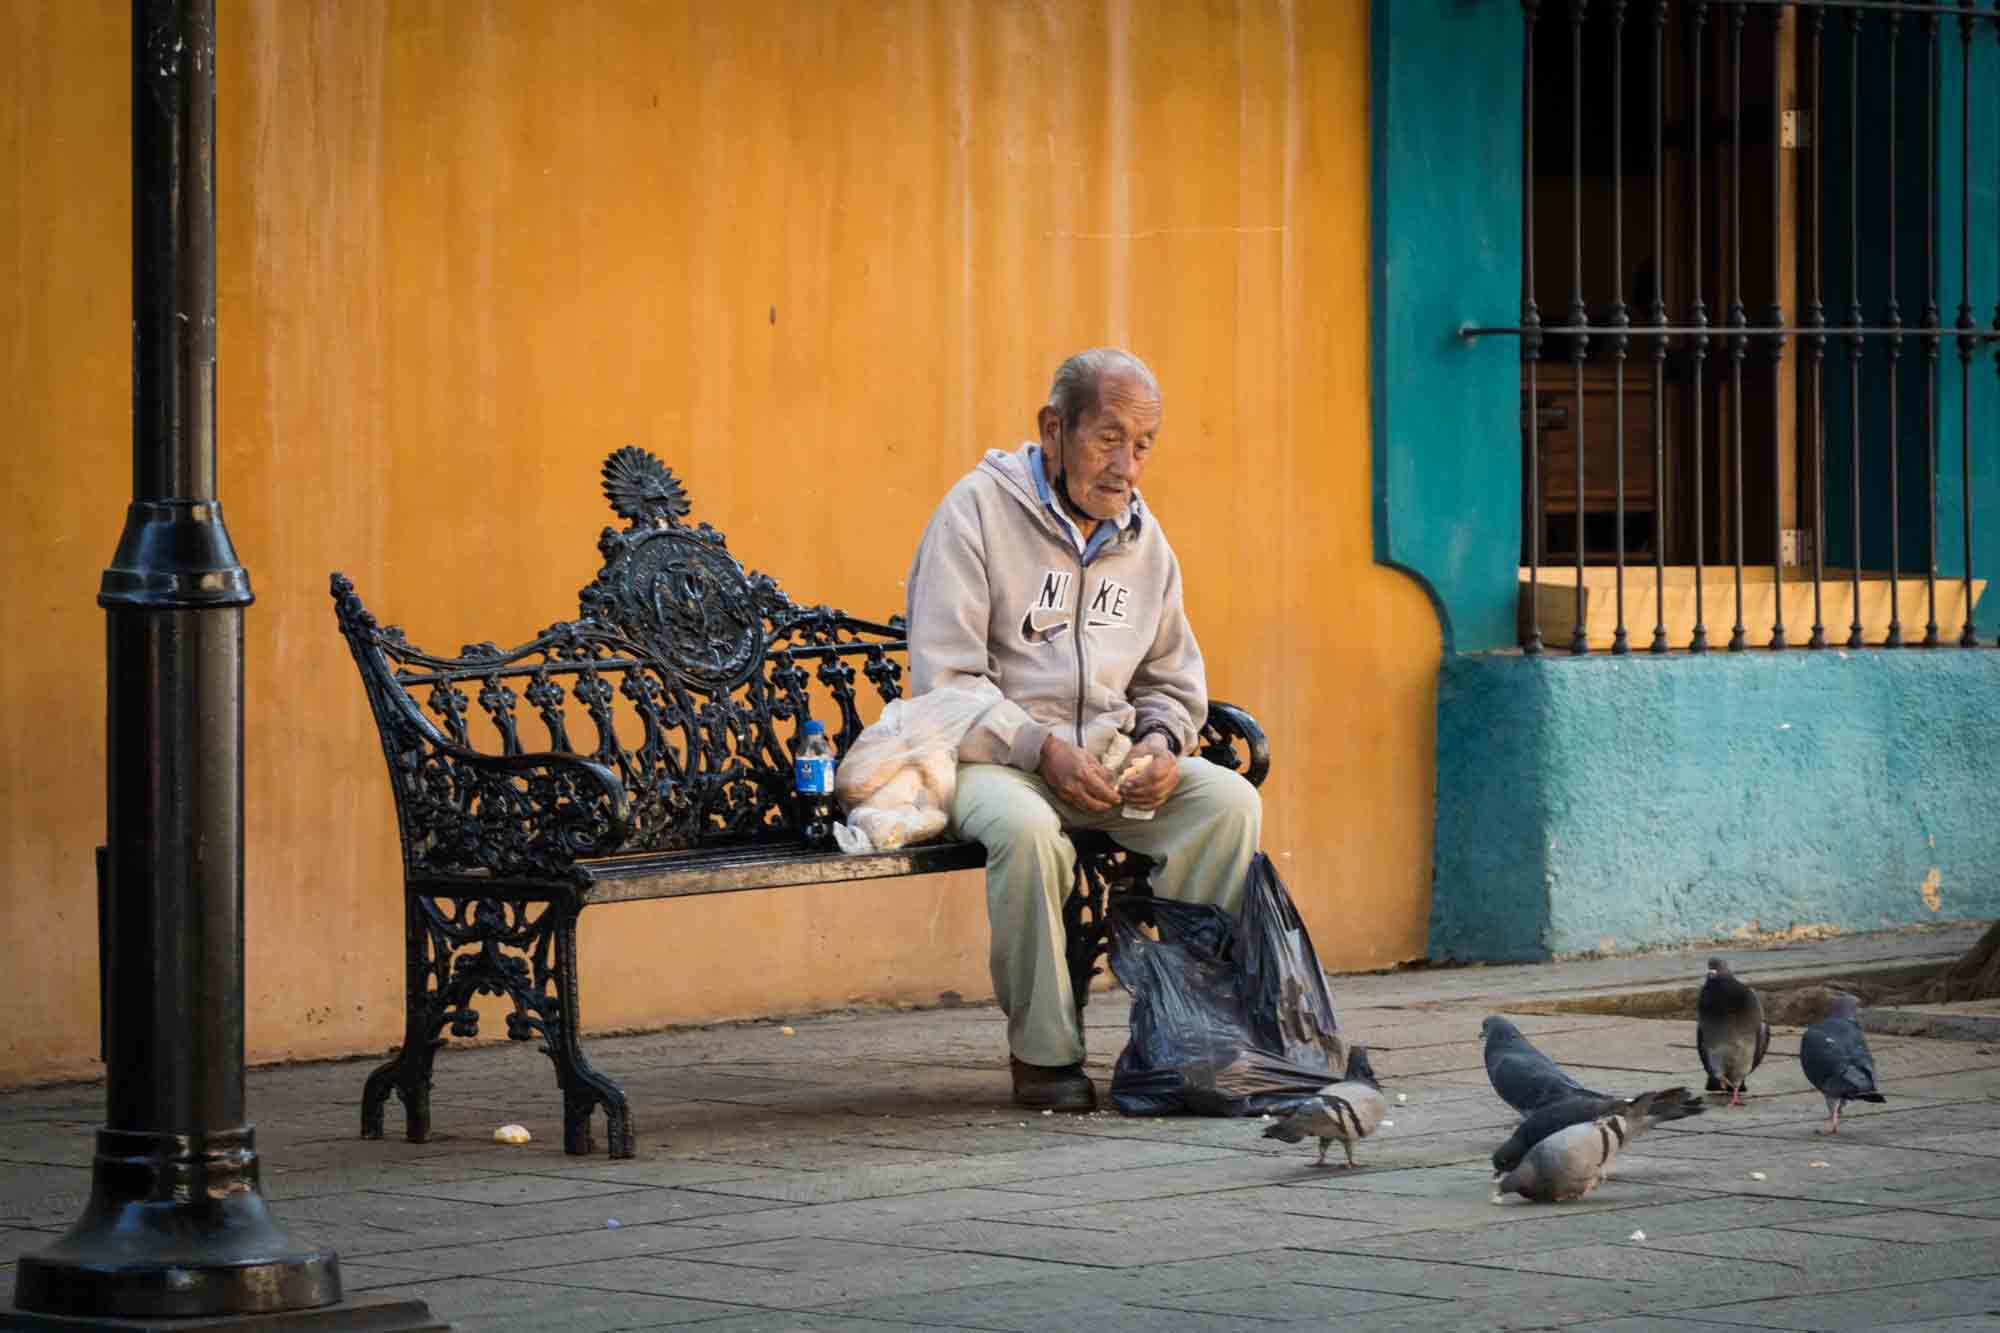 An old man on a bench feeds the pigeons in Oaxaca